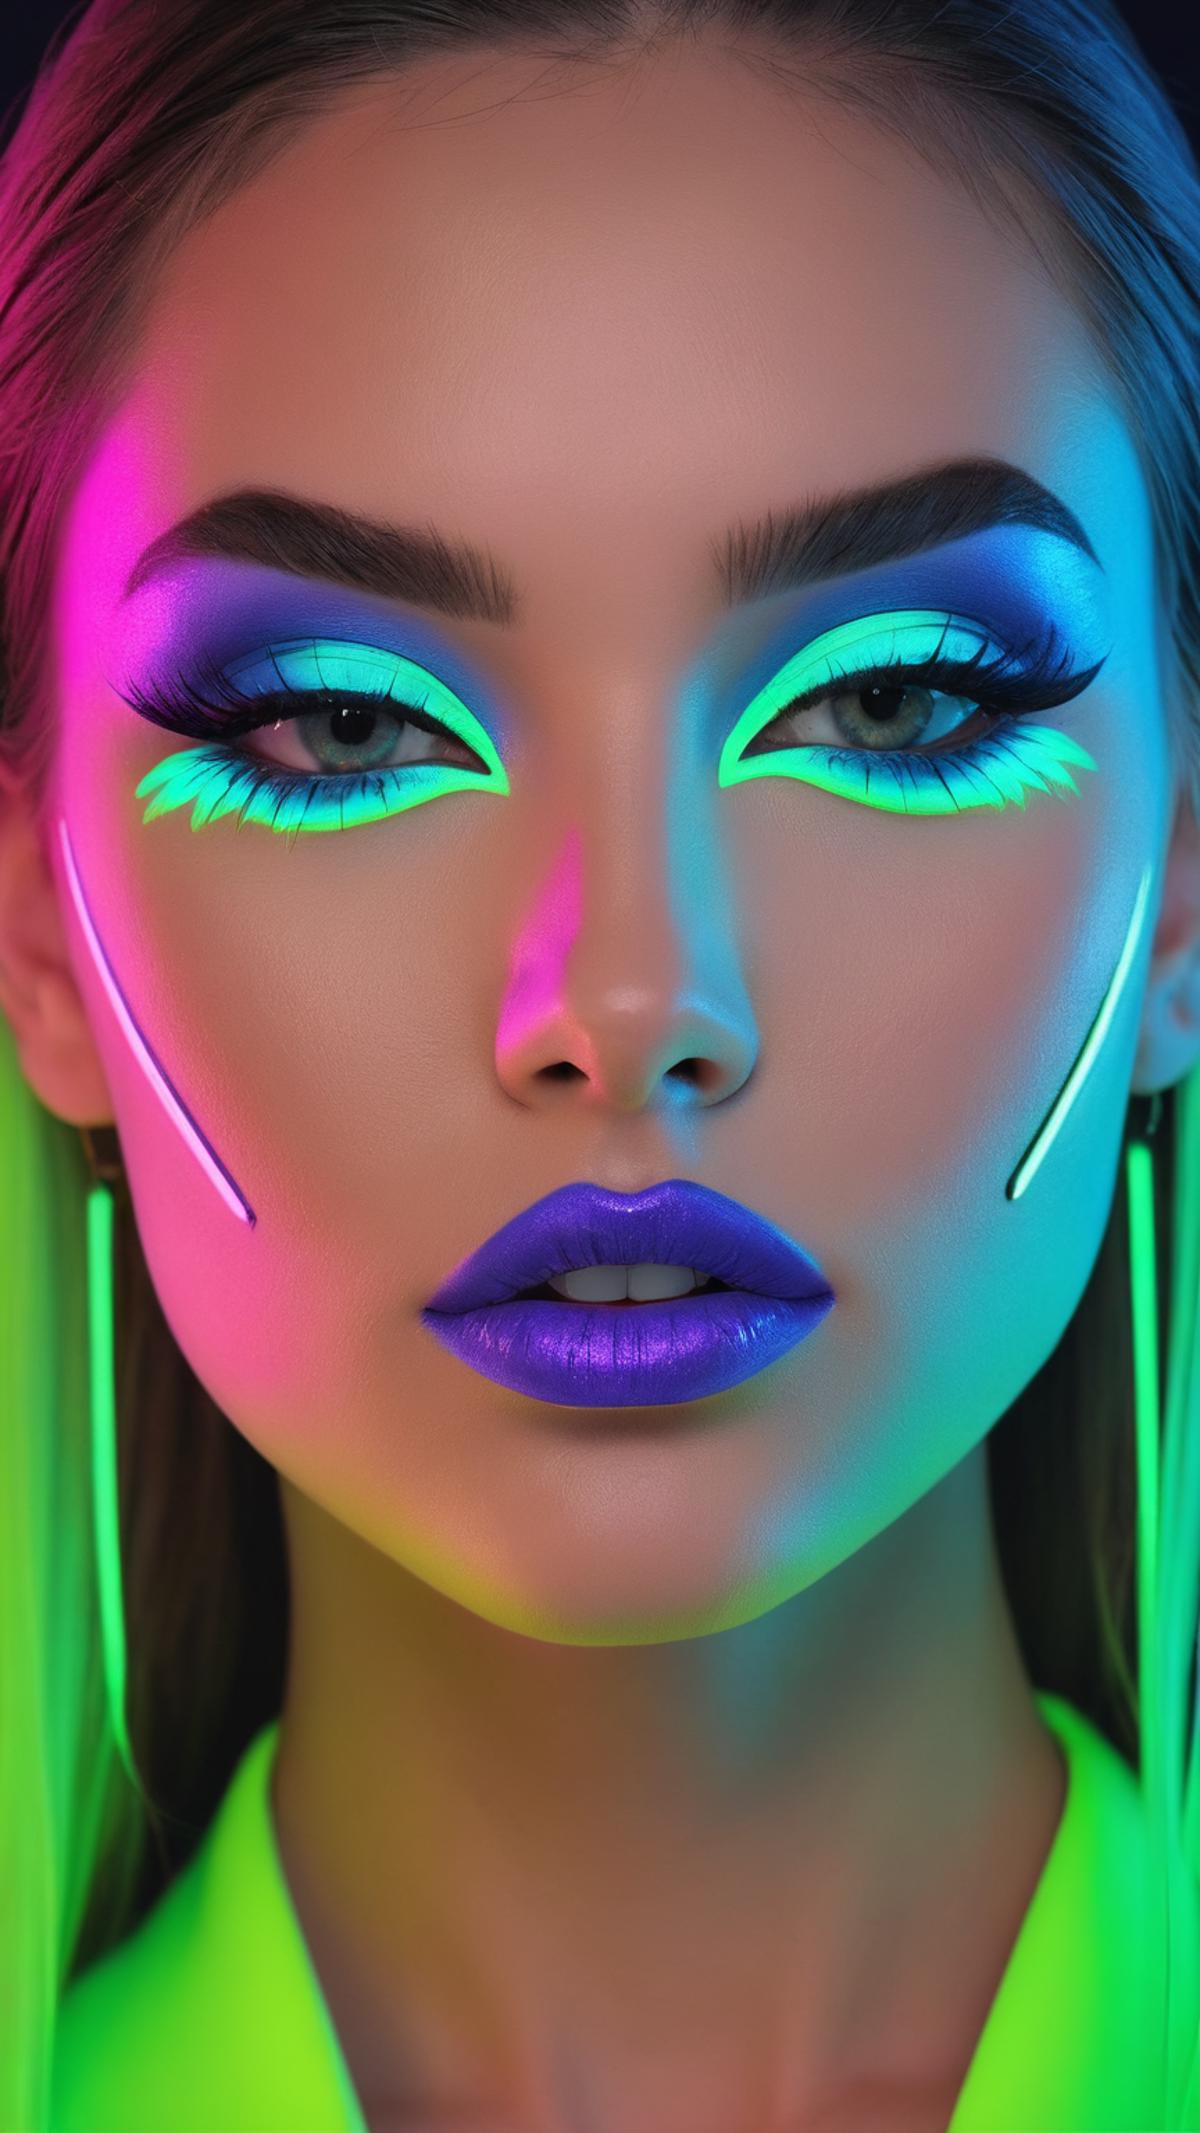 A woman with blue lipstick, green eyeshadow, and neon lighting on her face.